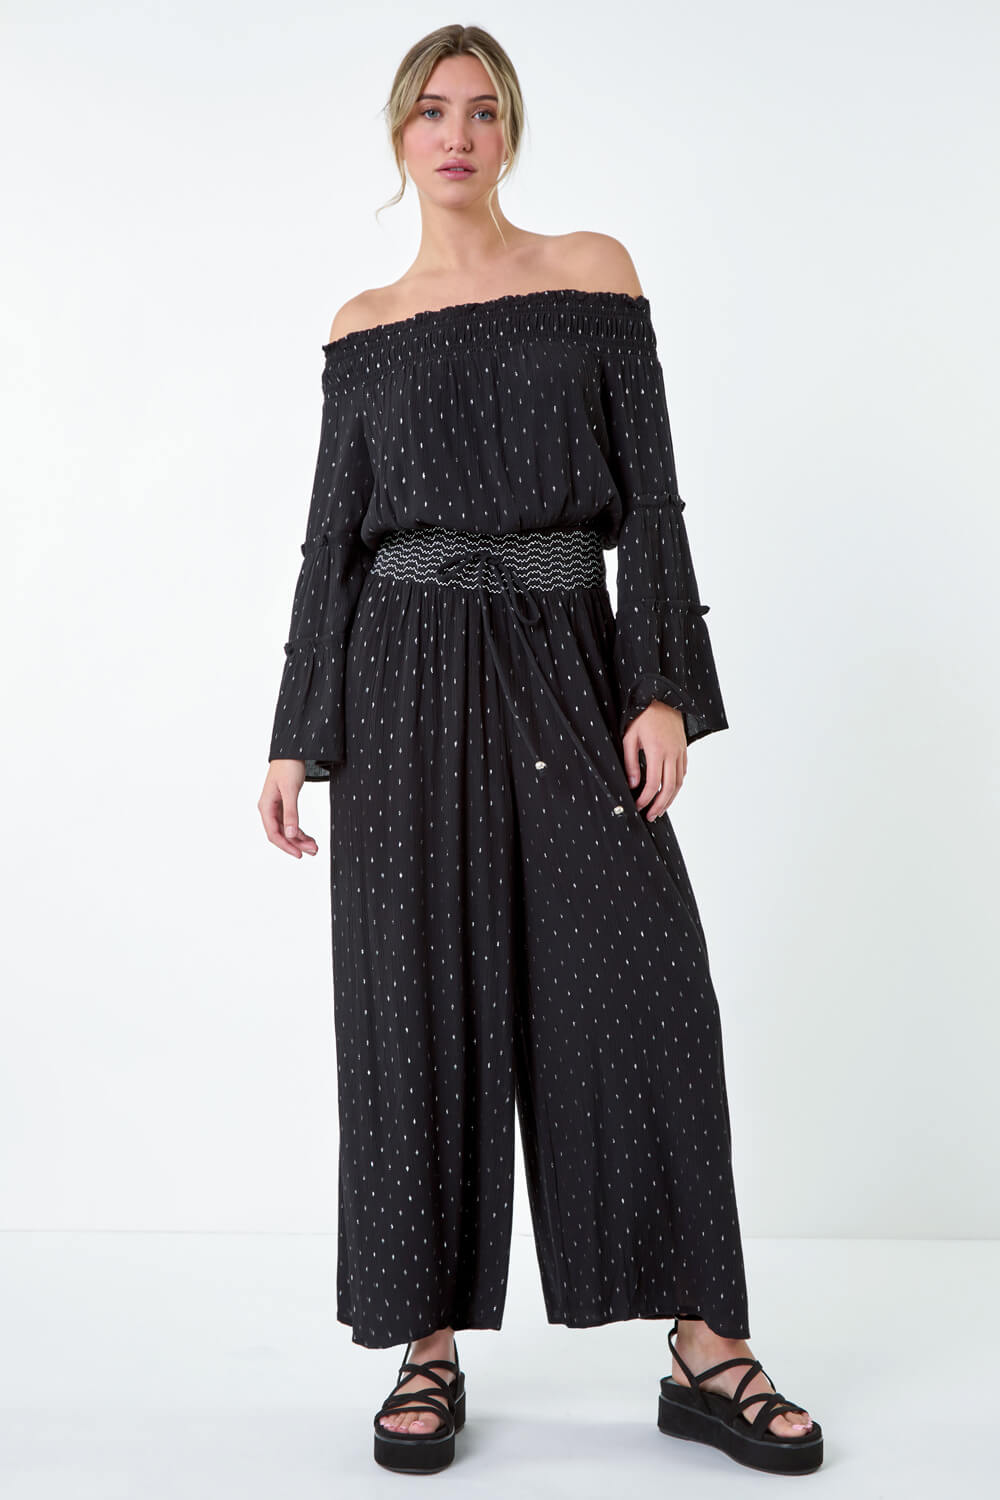 Black Shimmer Stretch Shirrred Wide Leg Trousers, Image 2 of 5